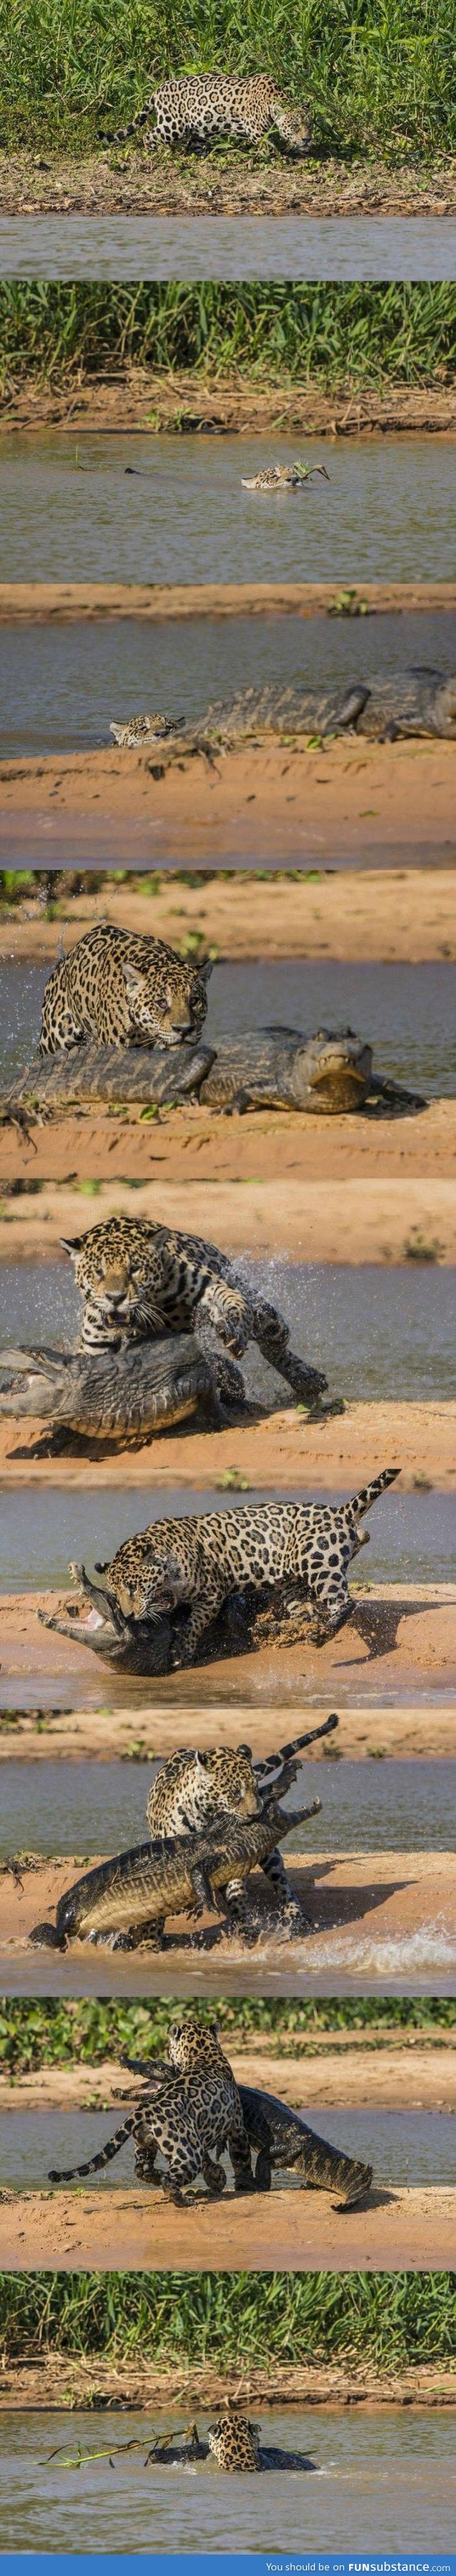 And you thought crocodiles are badass